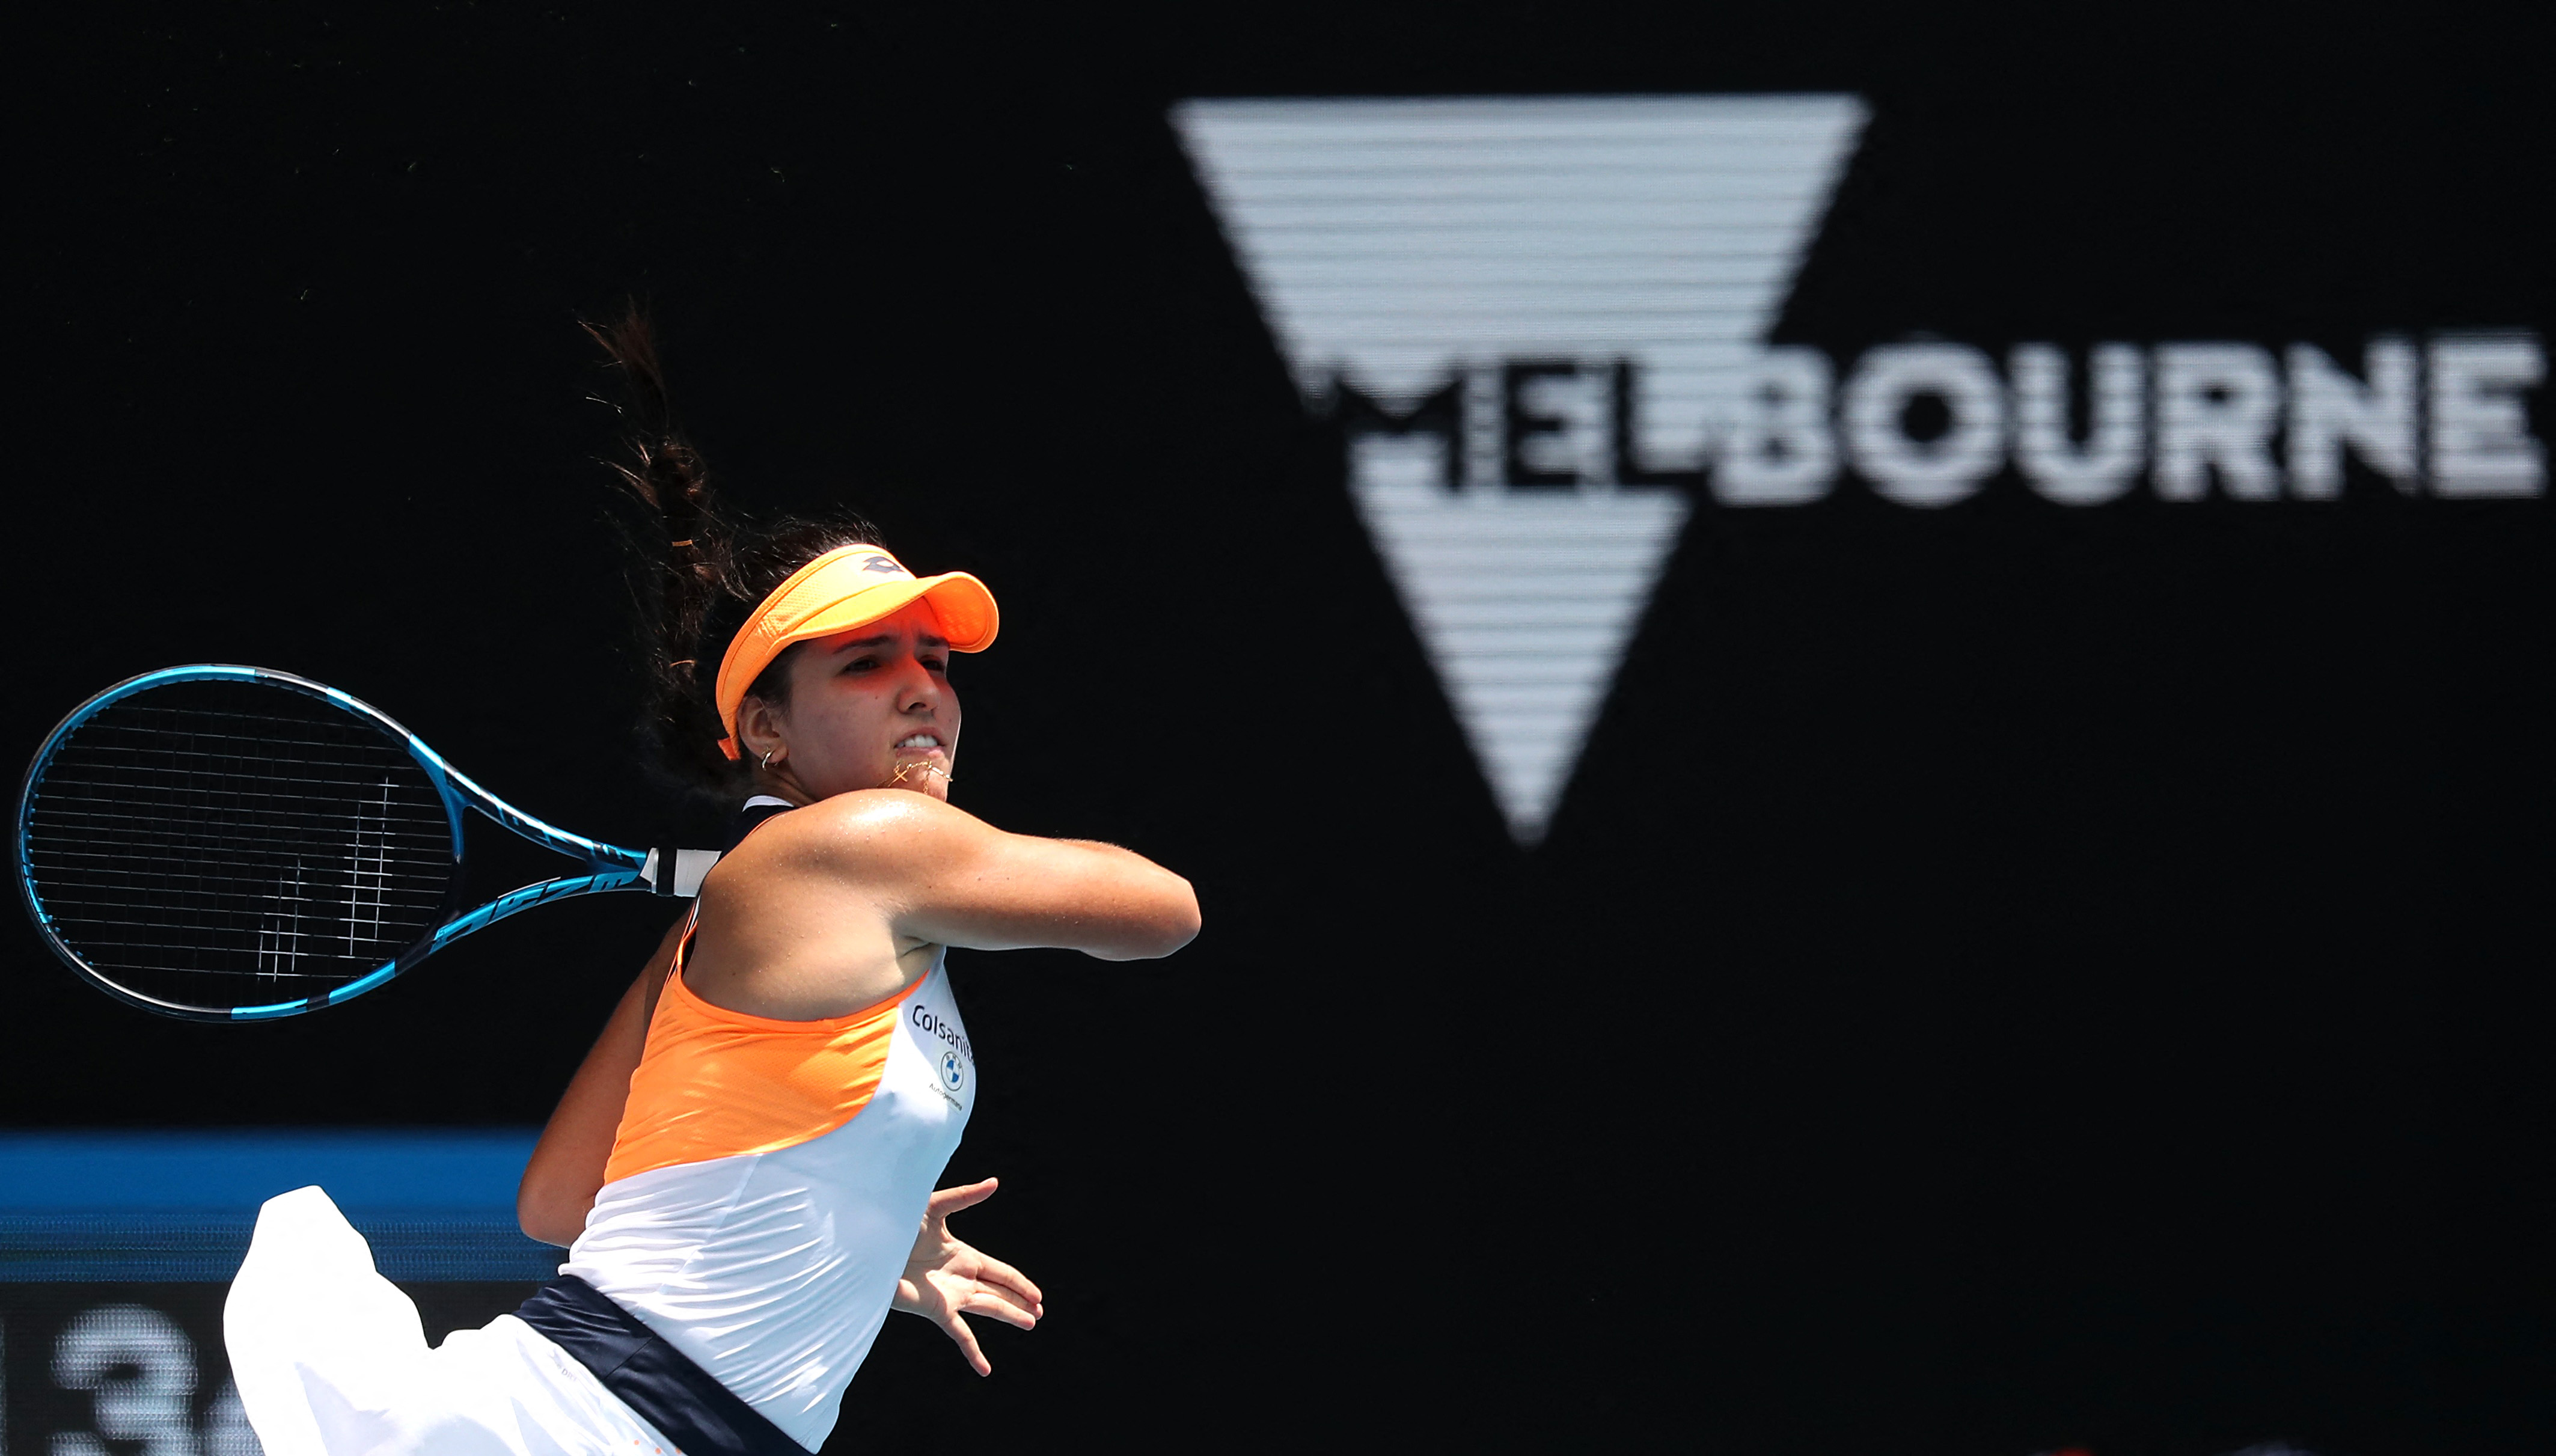 Tennis - Australian Open - Melbourne Park, Melbourne, Australia - January 17, 2022 Colombia's Camila Osorio in action during her first round match against  Japan's Naomi Osaka REUTERS/Asanka Brendon Ratnayake